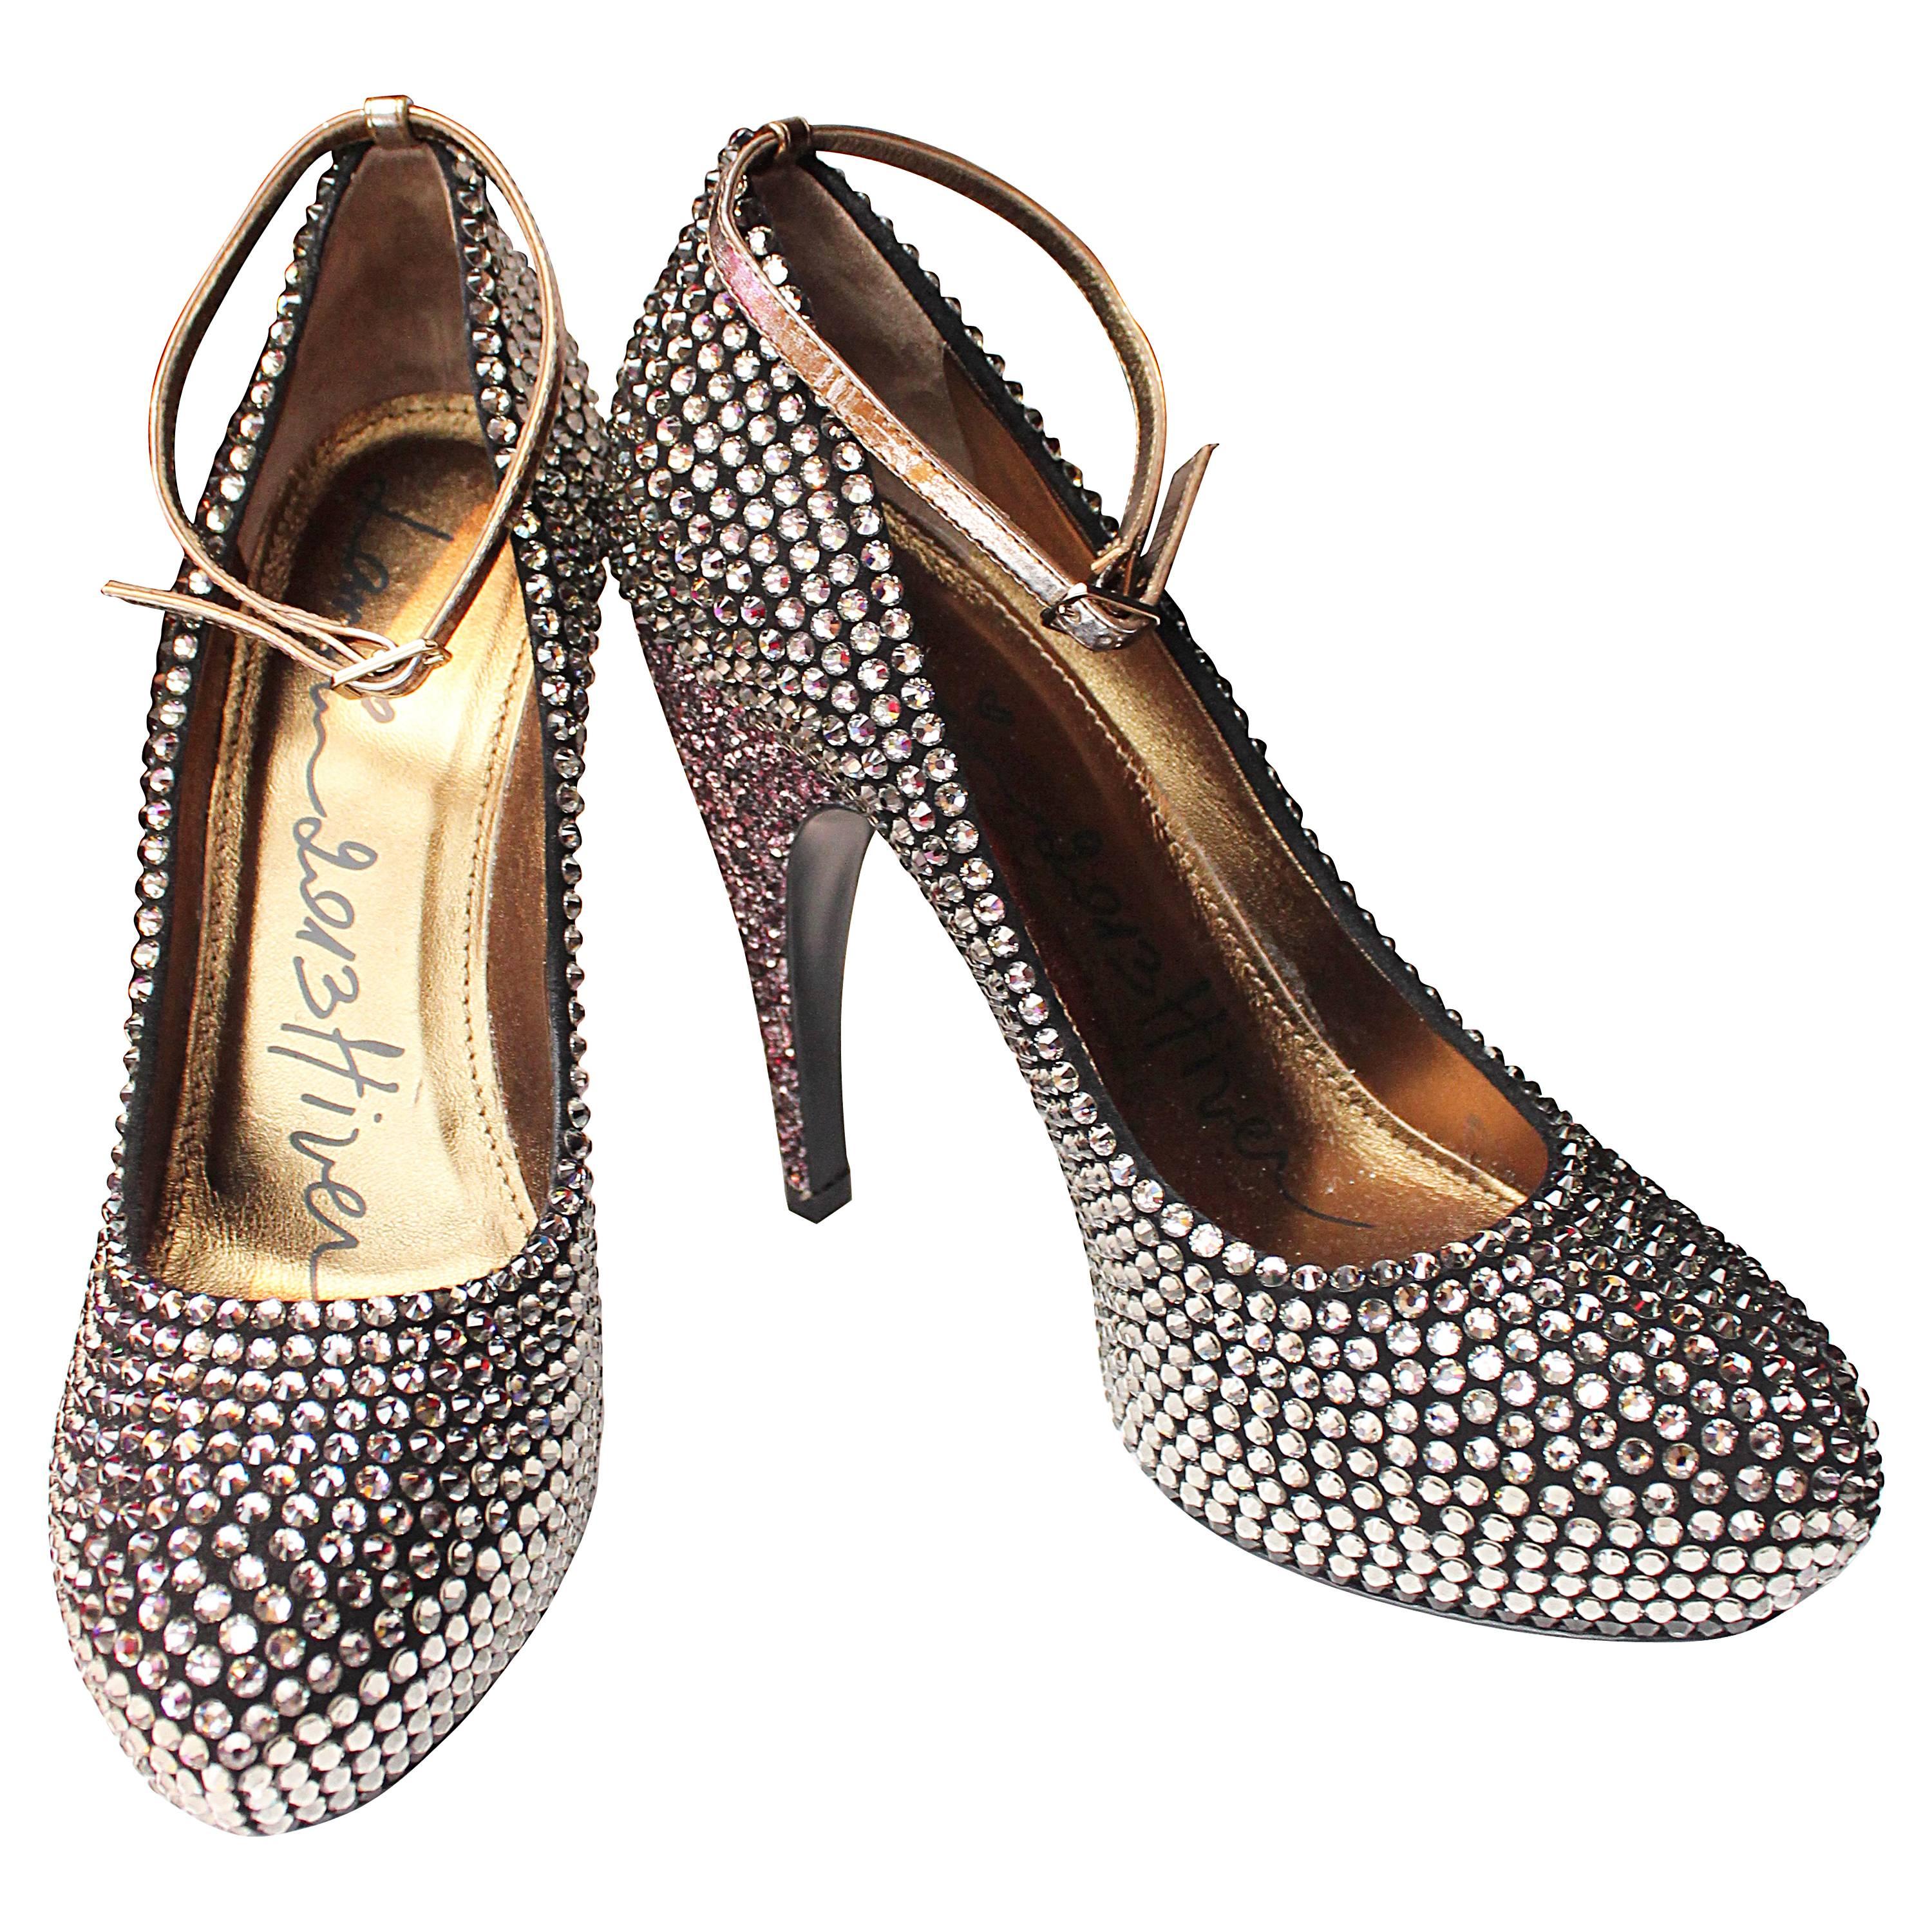 2013 Lanvin Platform Pumps with Grey and Pink Crystals For Sale